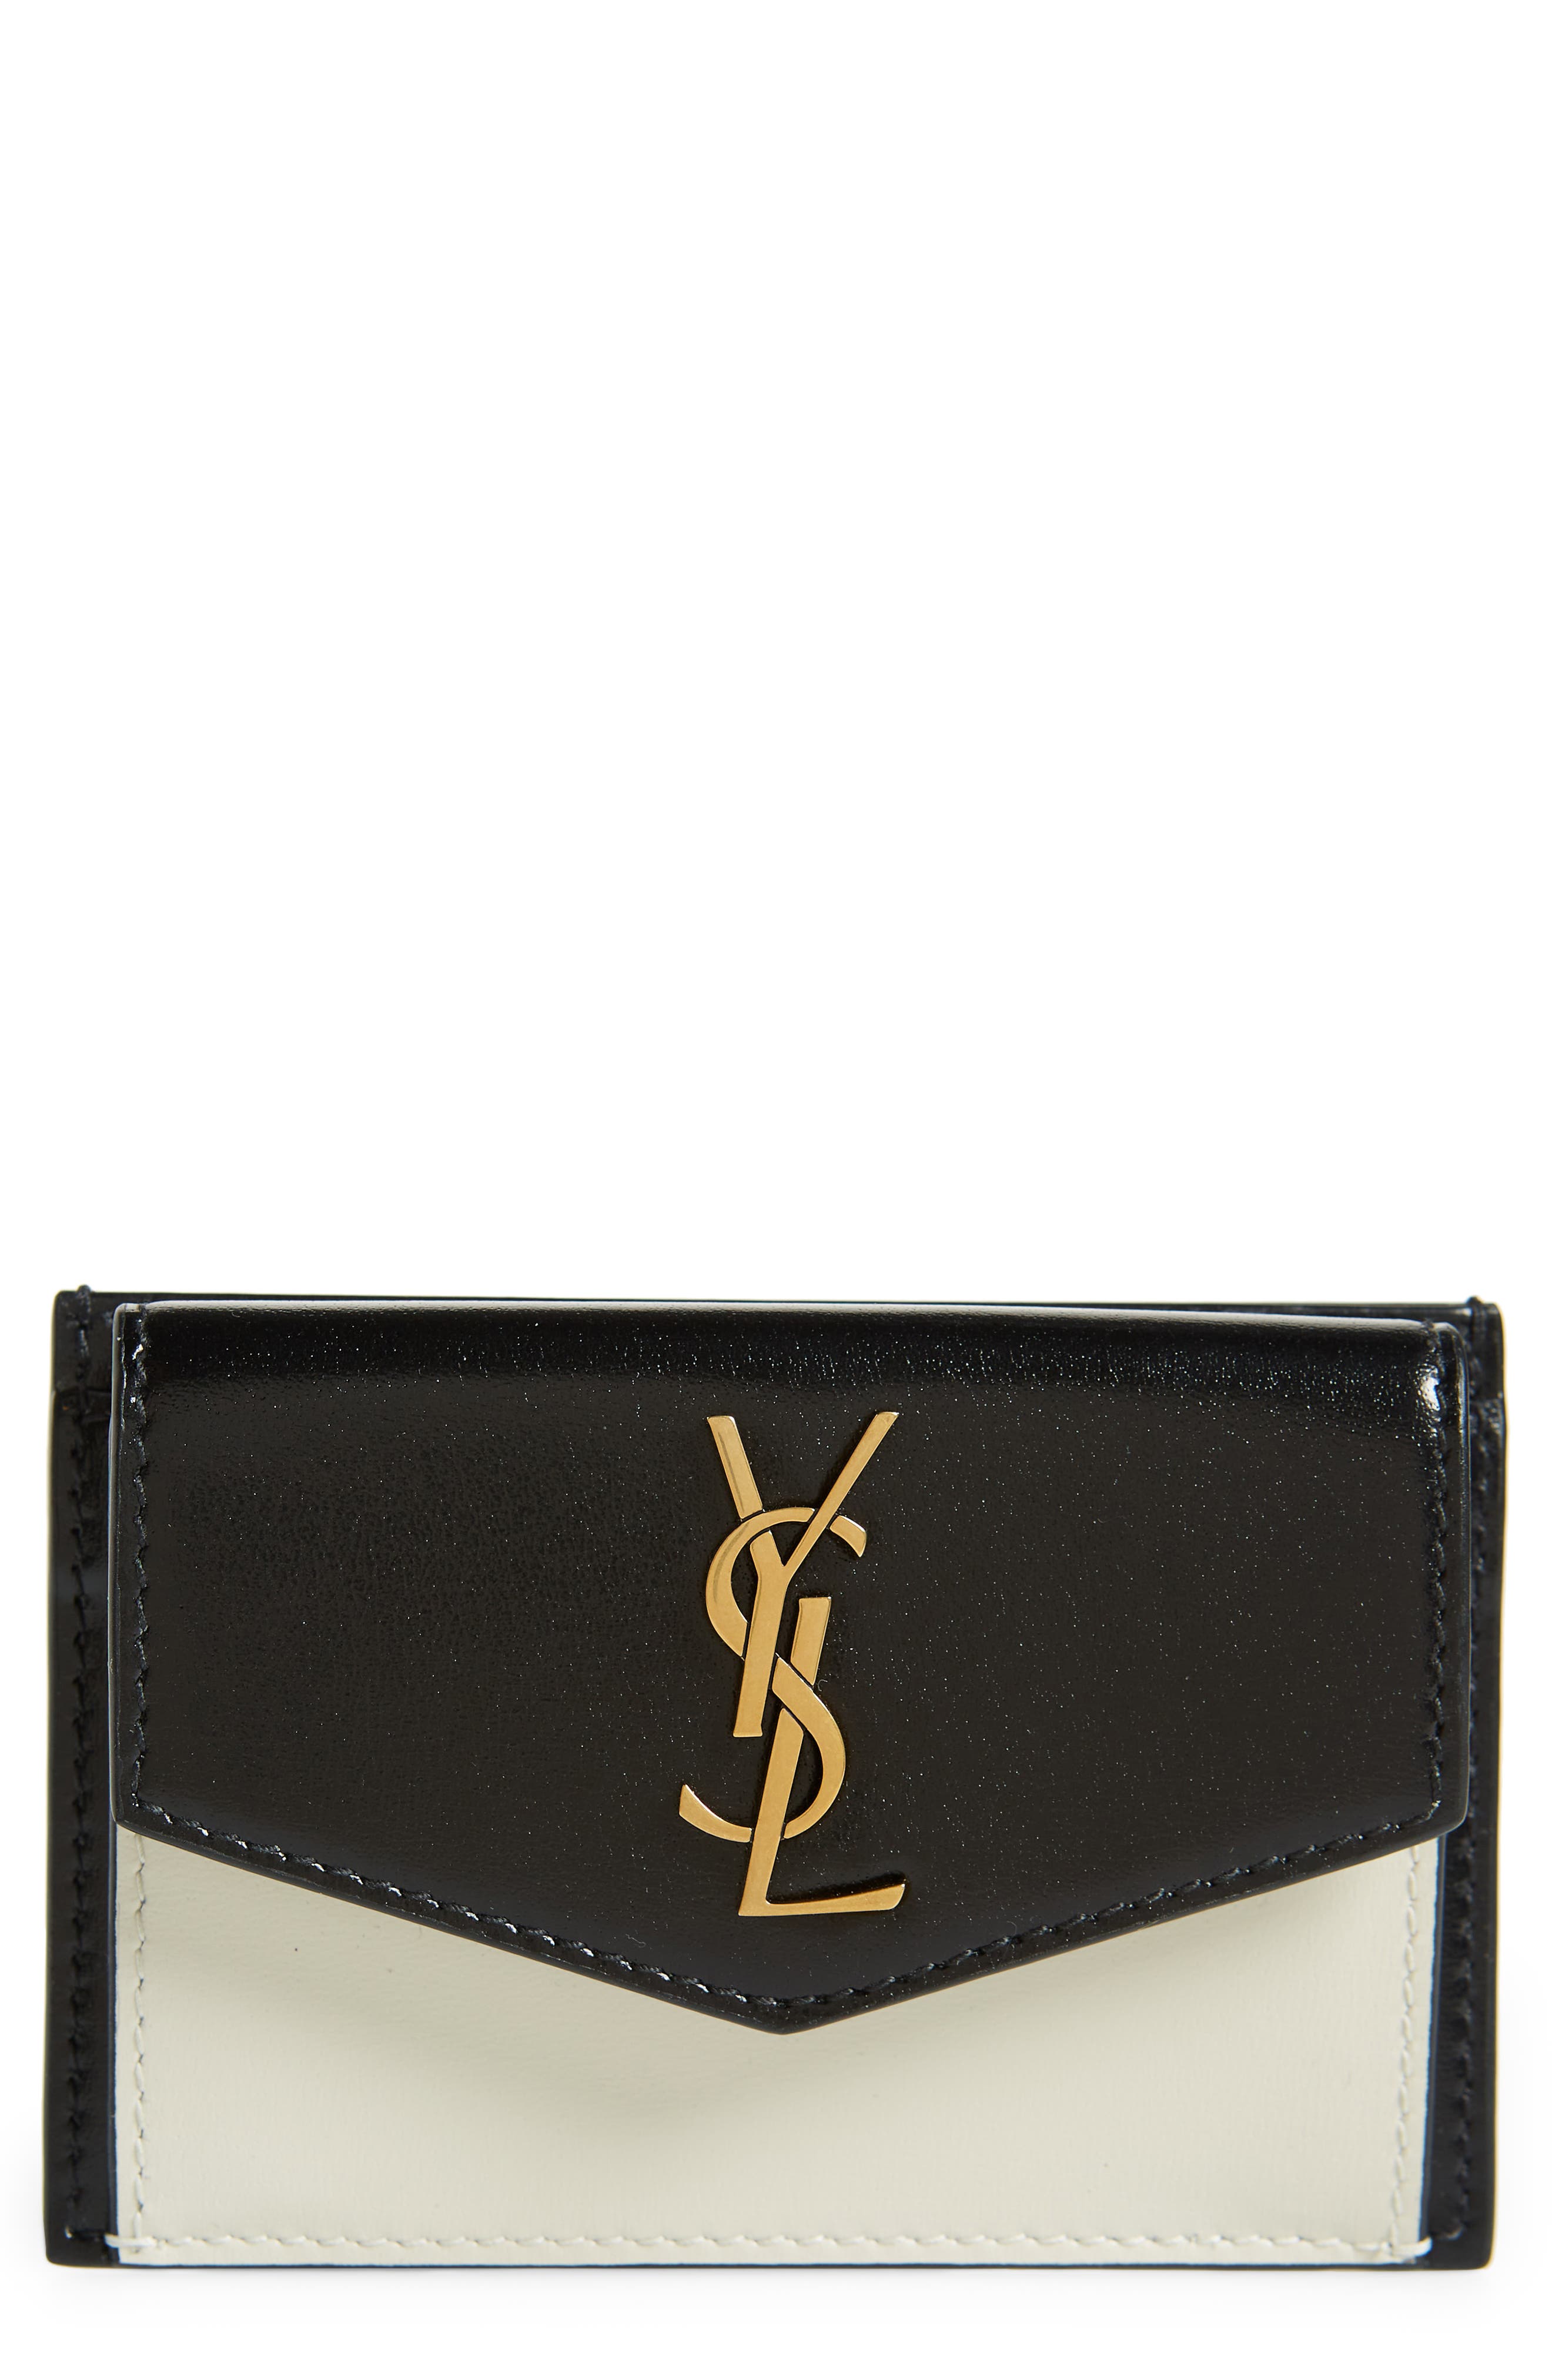 Saint Laurent Uptown Two-Tone Leather Flap Card Case in Nero/Crema Soft at Nordstrom